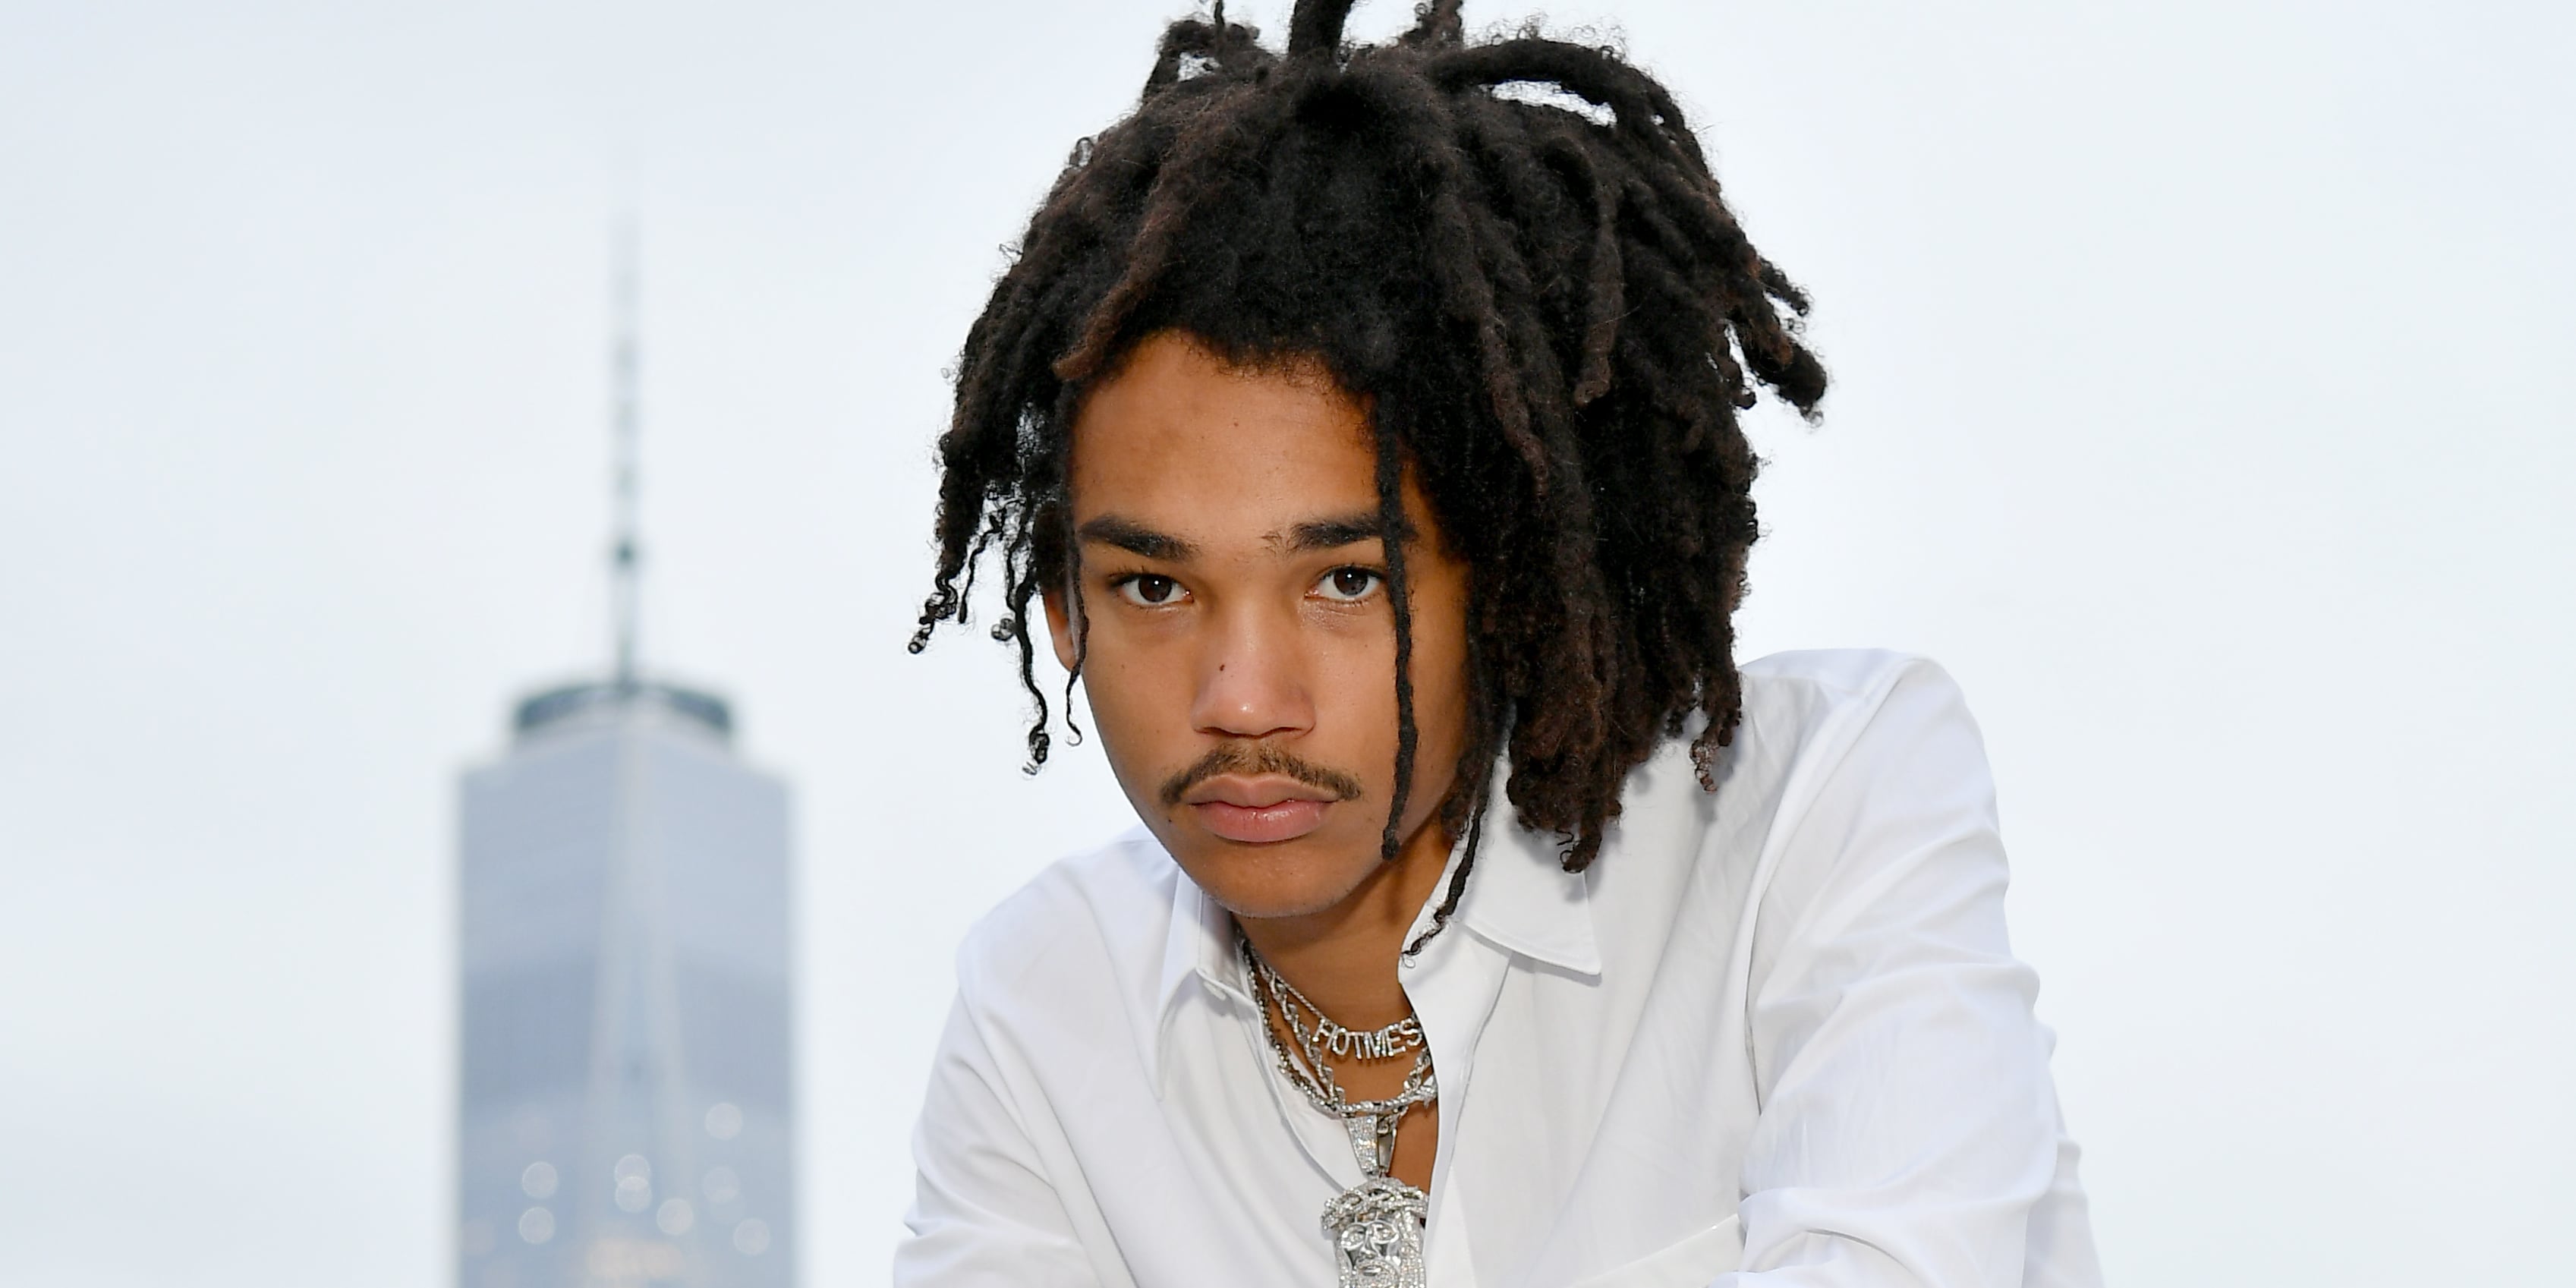 Luka Sabbat: All About the Influential Fashion Model